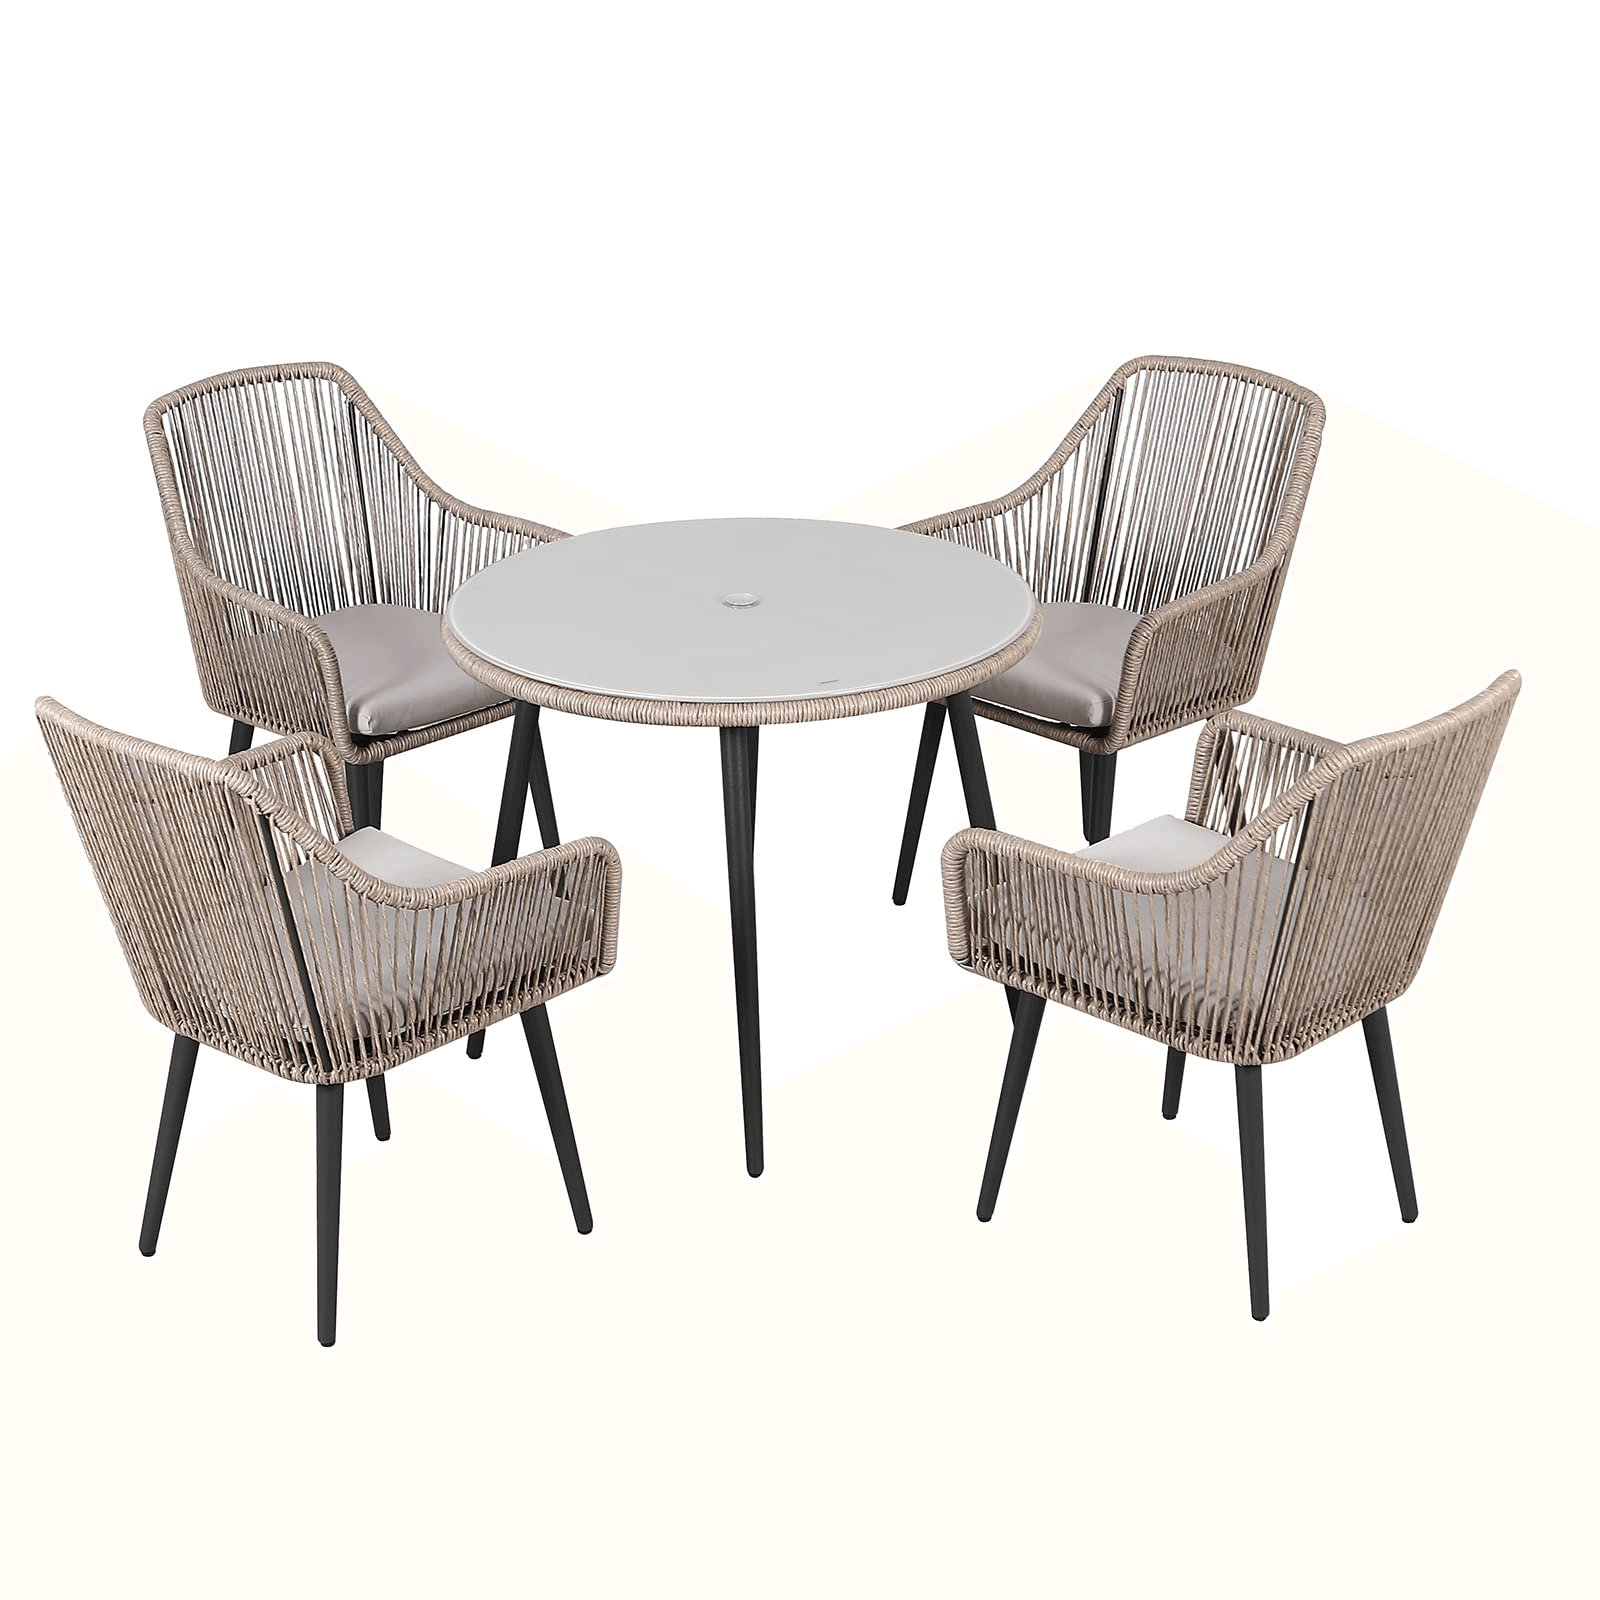 5-pc Outdoor Patio Dining Set, Light Grey Rattan, Glass Table Top With 2'' Umbrella Hole